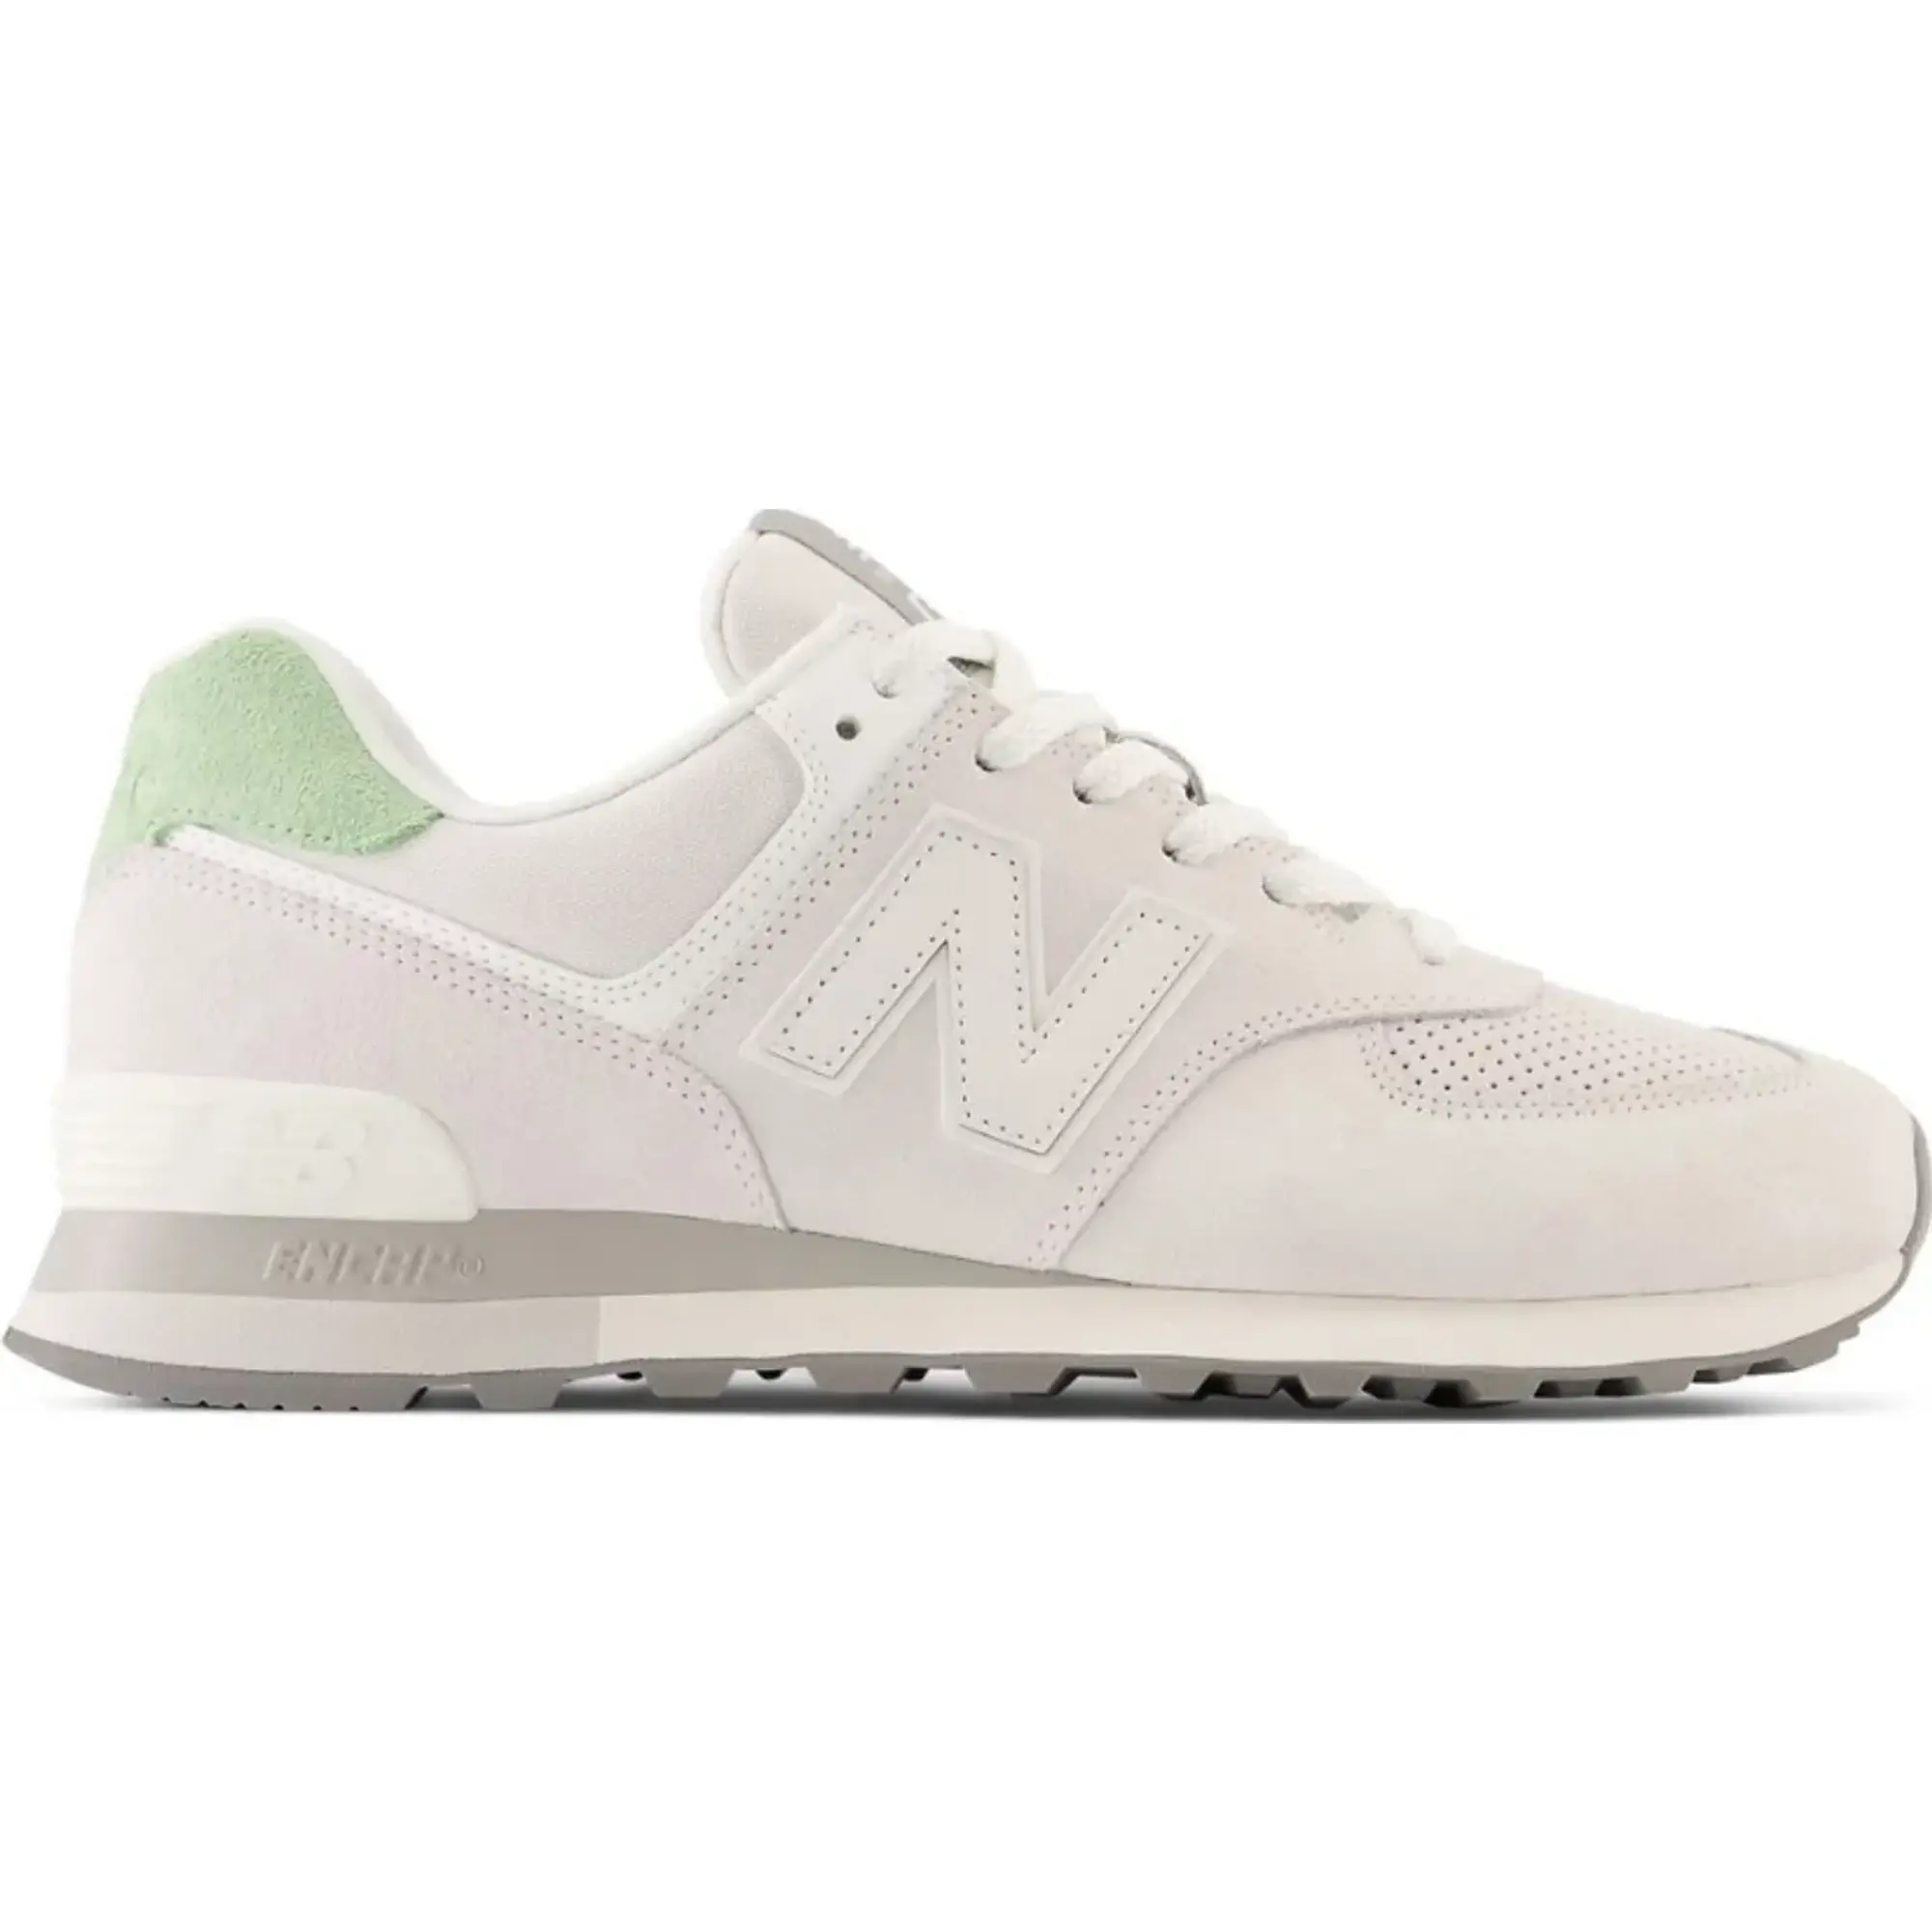 New Balance 574 Trainers In White And Green